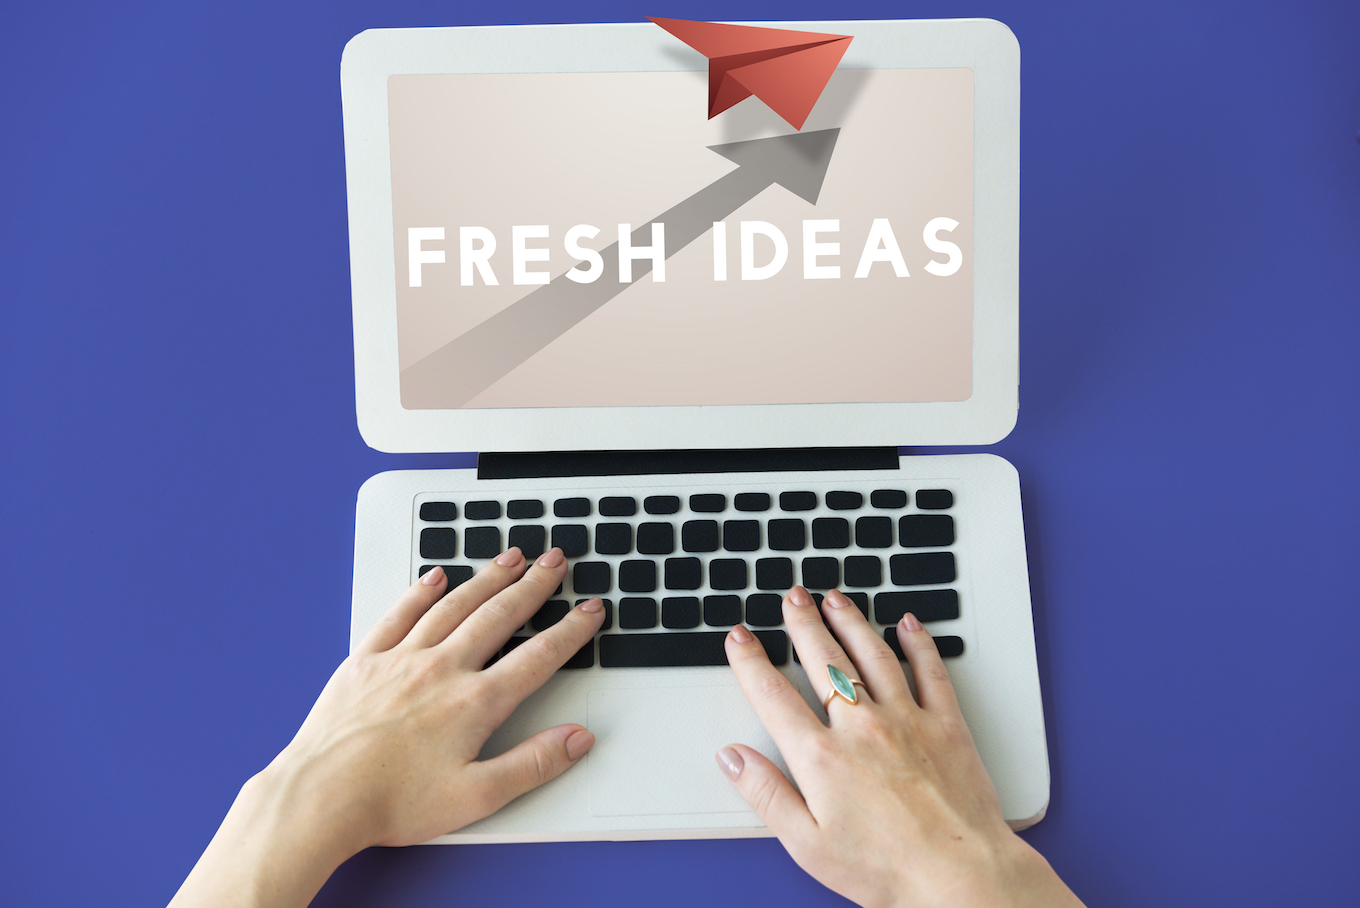 Fresh New Email Marketing Ideas By KW Creative Helping You Deliver Successful Email Marketing Campagins - Kent Wynne Email Marketing Solutions (C)